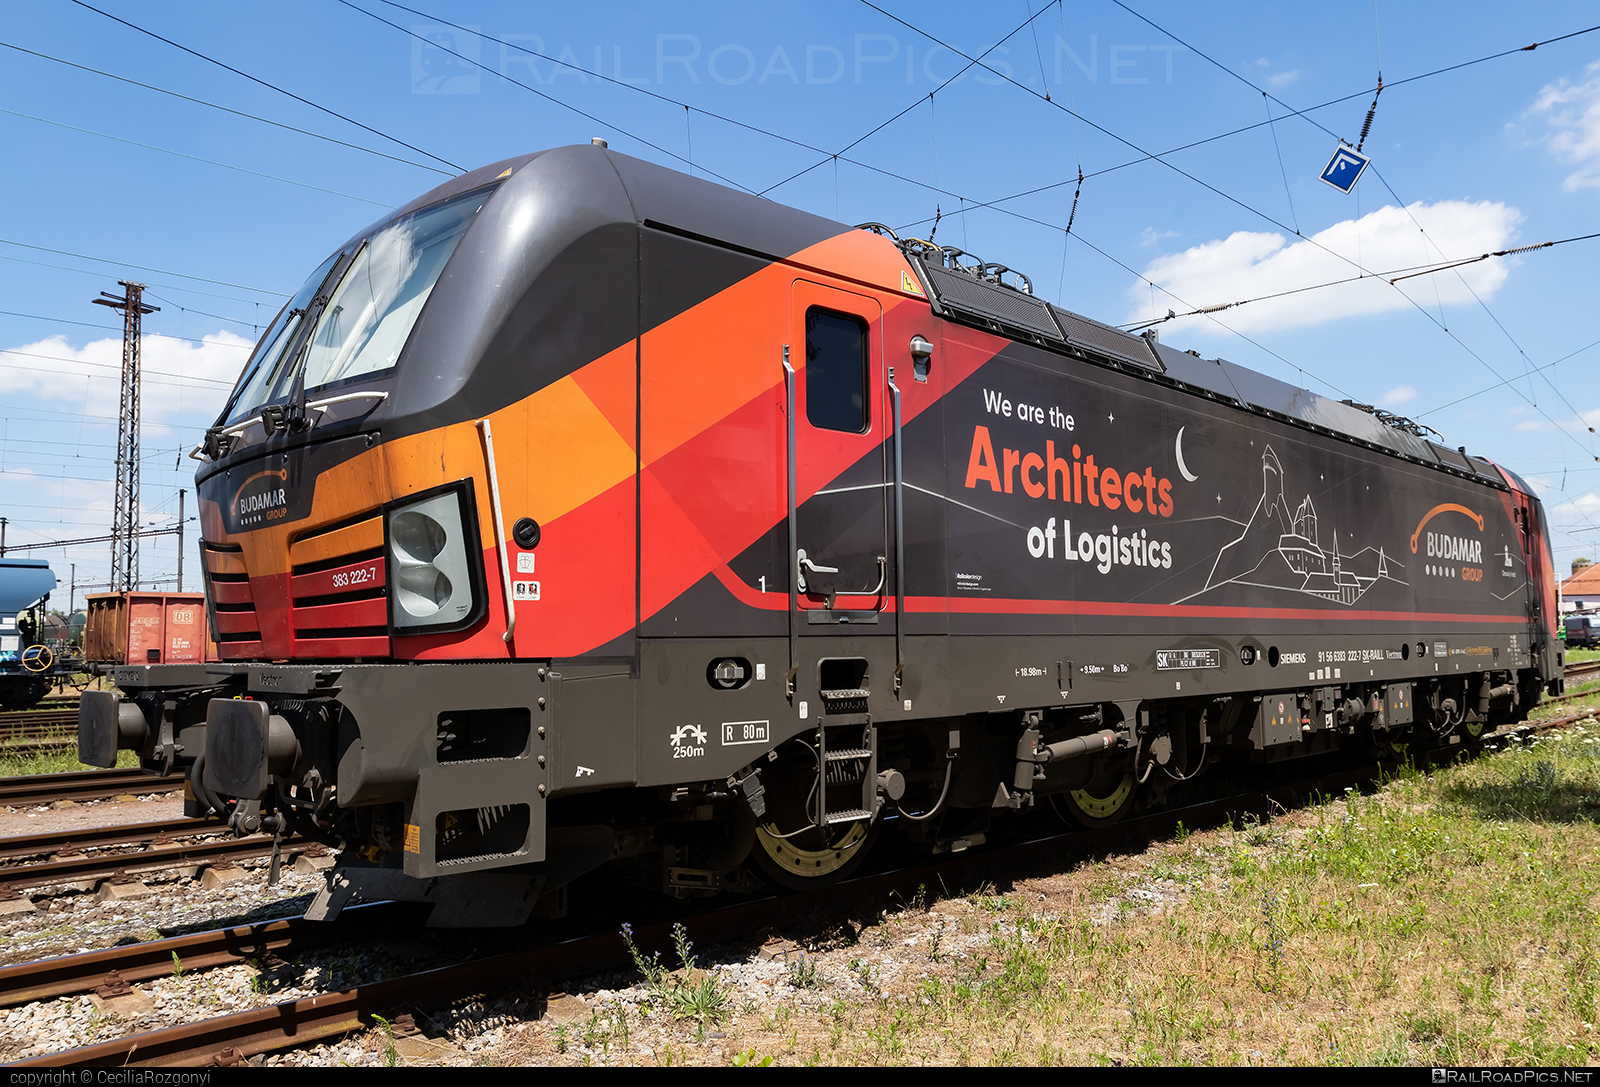 Siemens Vectron MS - 383 222-7 operated by LOKORAIL, a.s. #RollingStockLease #RollingStockLeaseSro #budamar #lokorail #lrl #raill #siemens #siemensVectron #siemensVectronMS #vectron #vectronMS